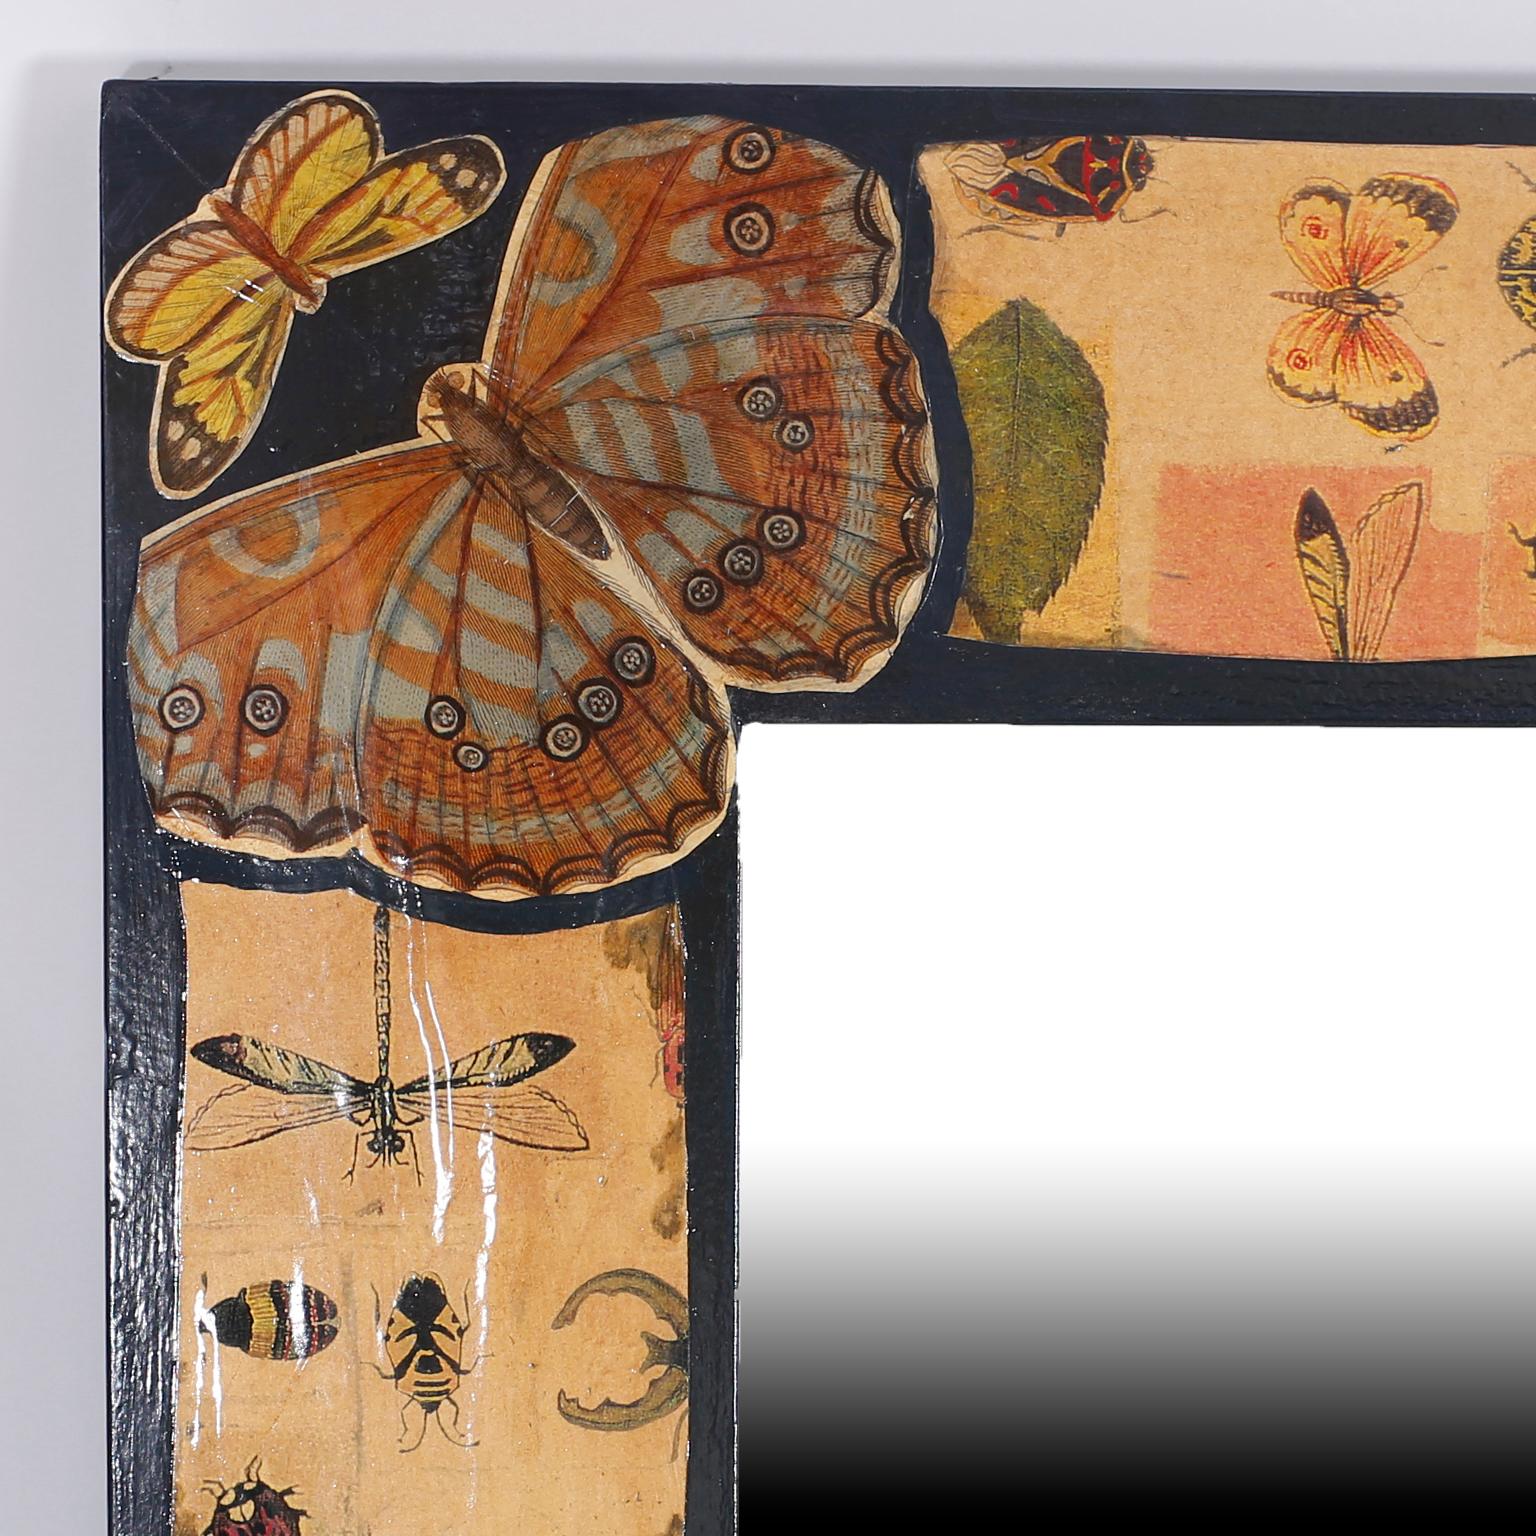 Square mirror with an enchanting découpaged frame decorated with butterflies, dragonflies, bugs, and an assortment of insects.